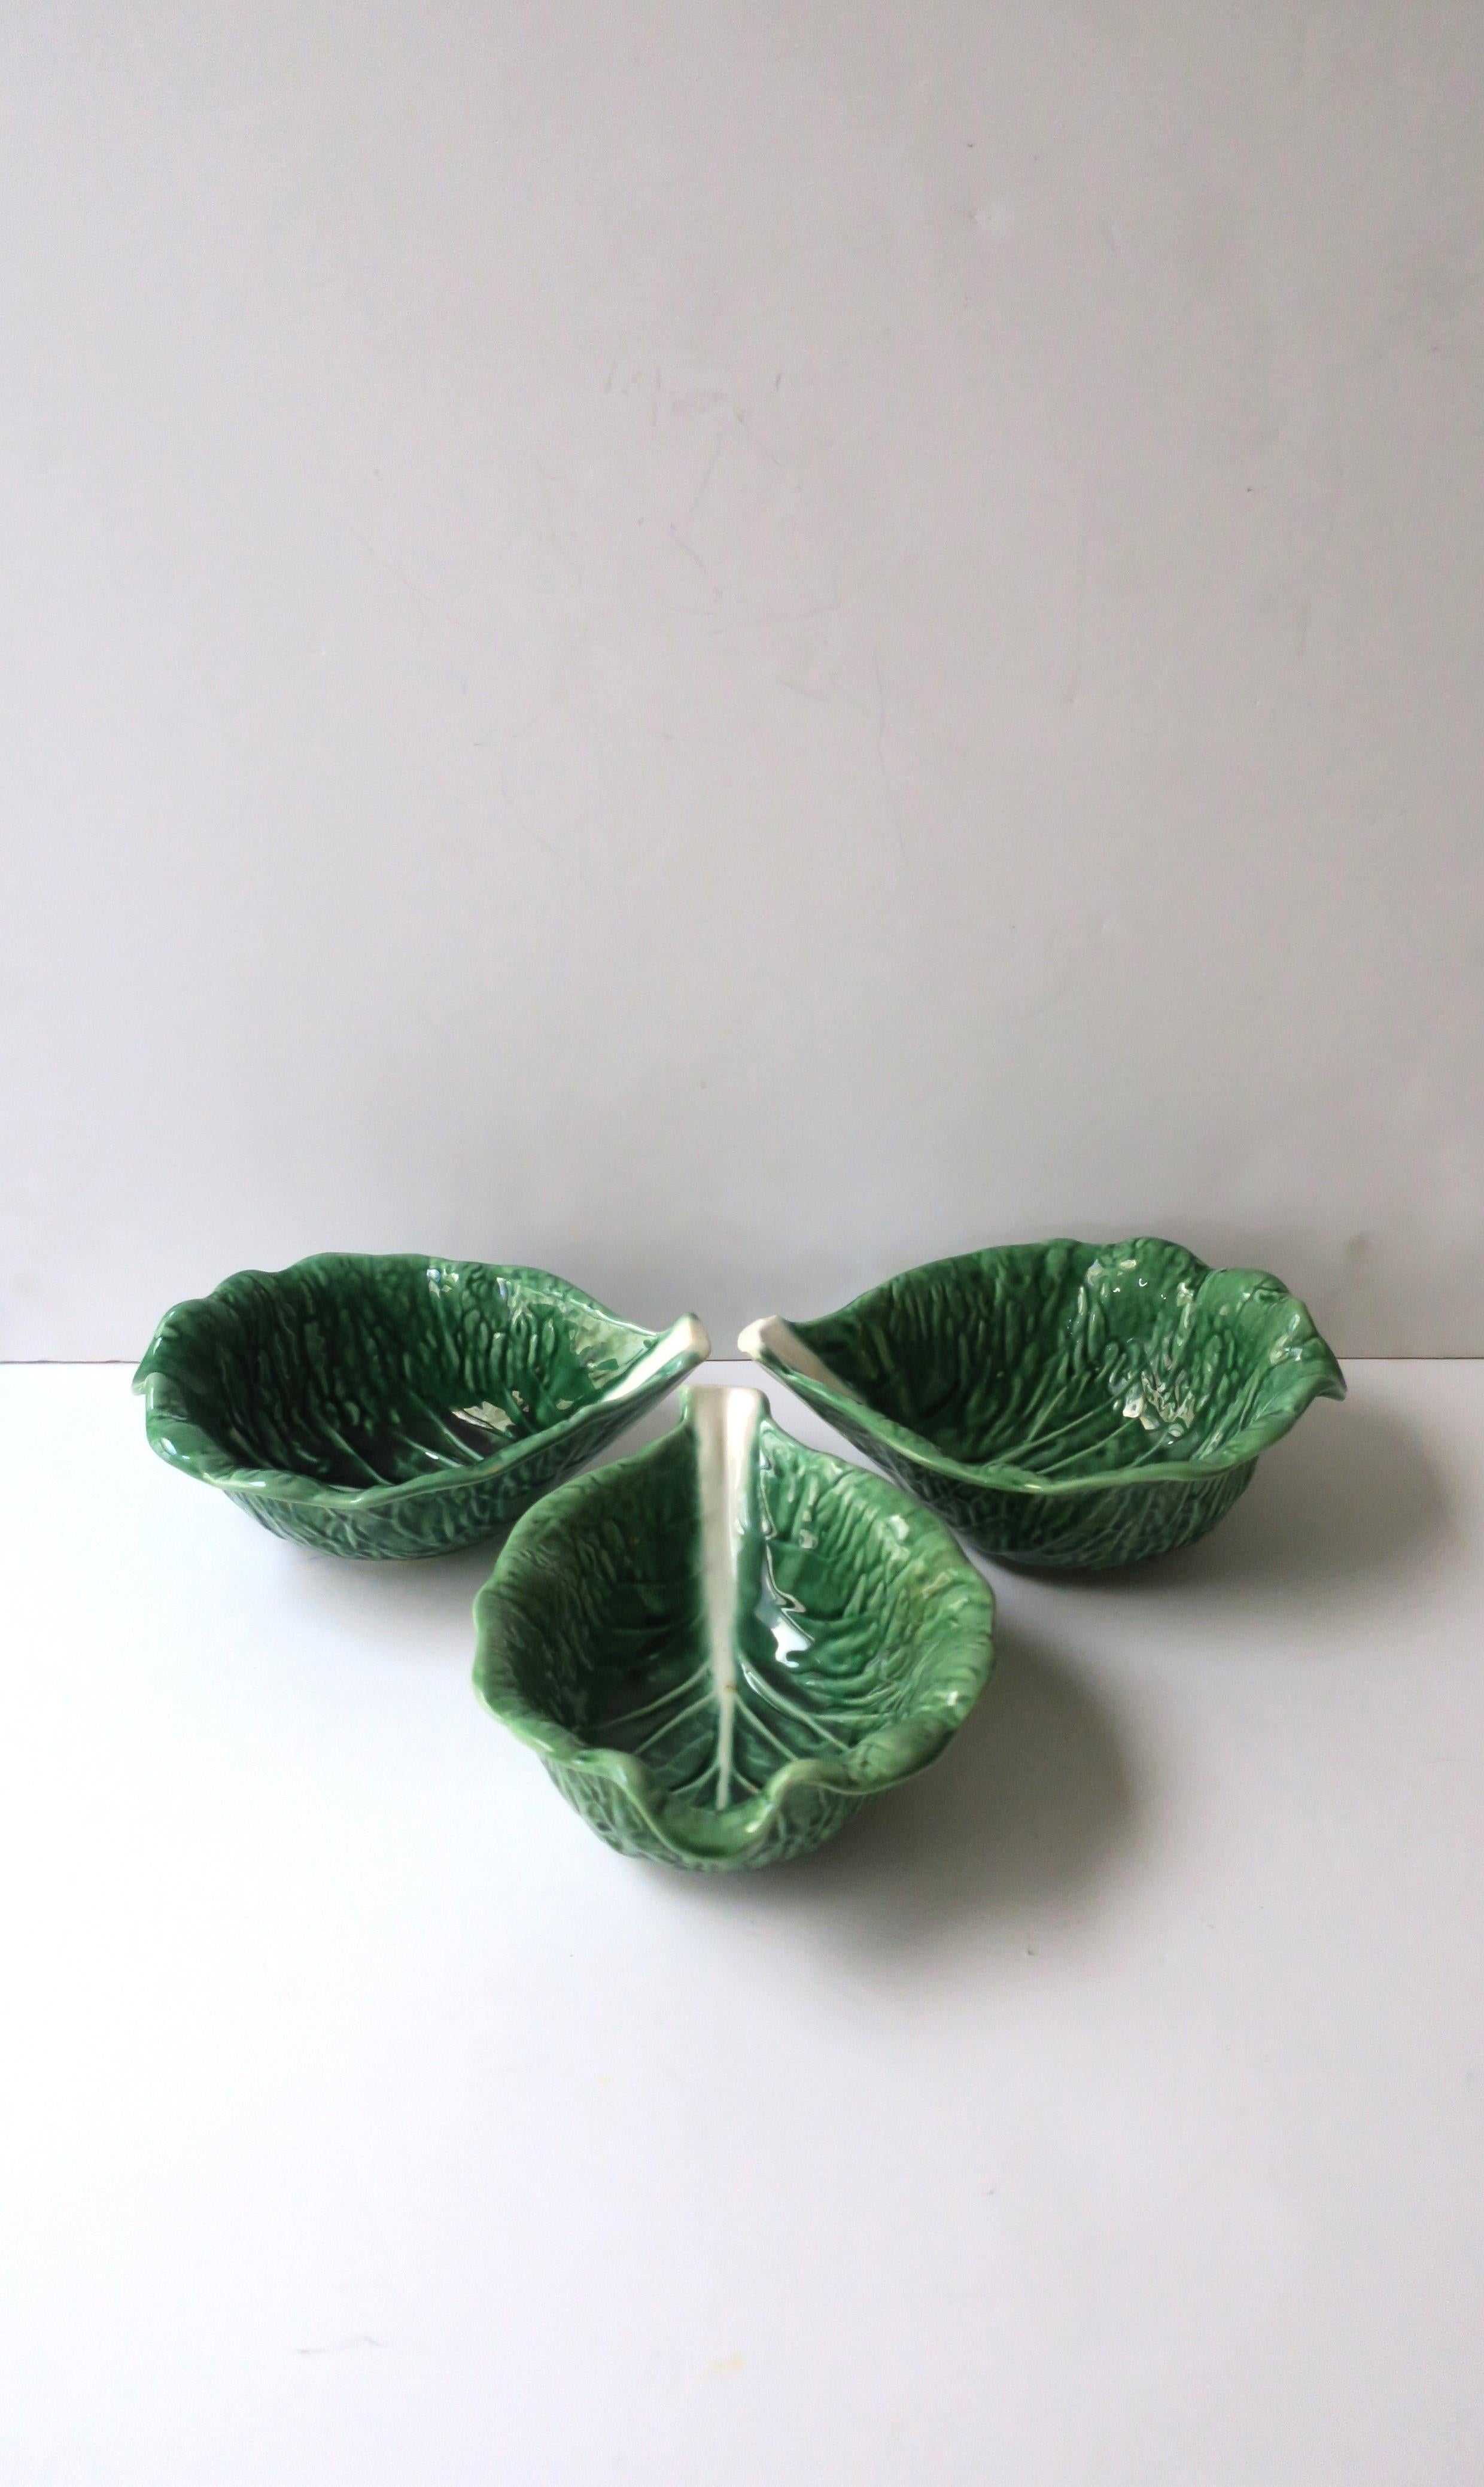 Ceramic Green Lettuce or Cabbage Leaf Serving or Dip Bowl Trompe l'Oeil Style, 5 Avail For Sale